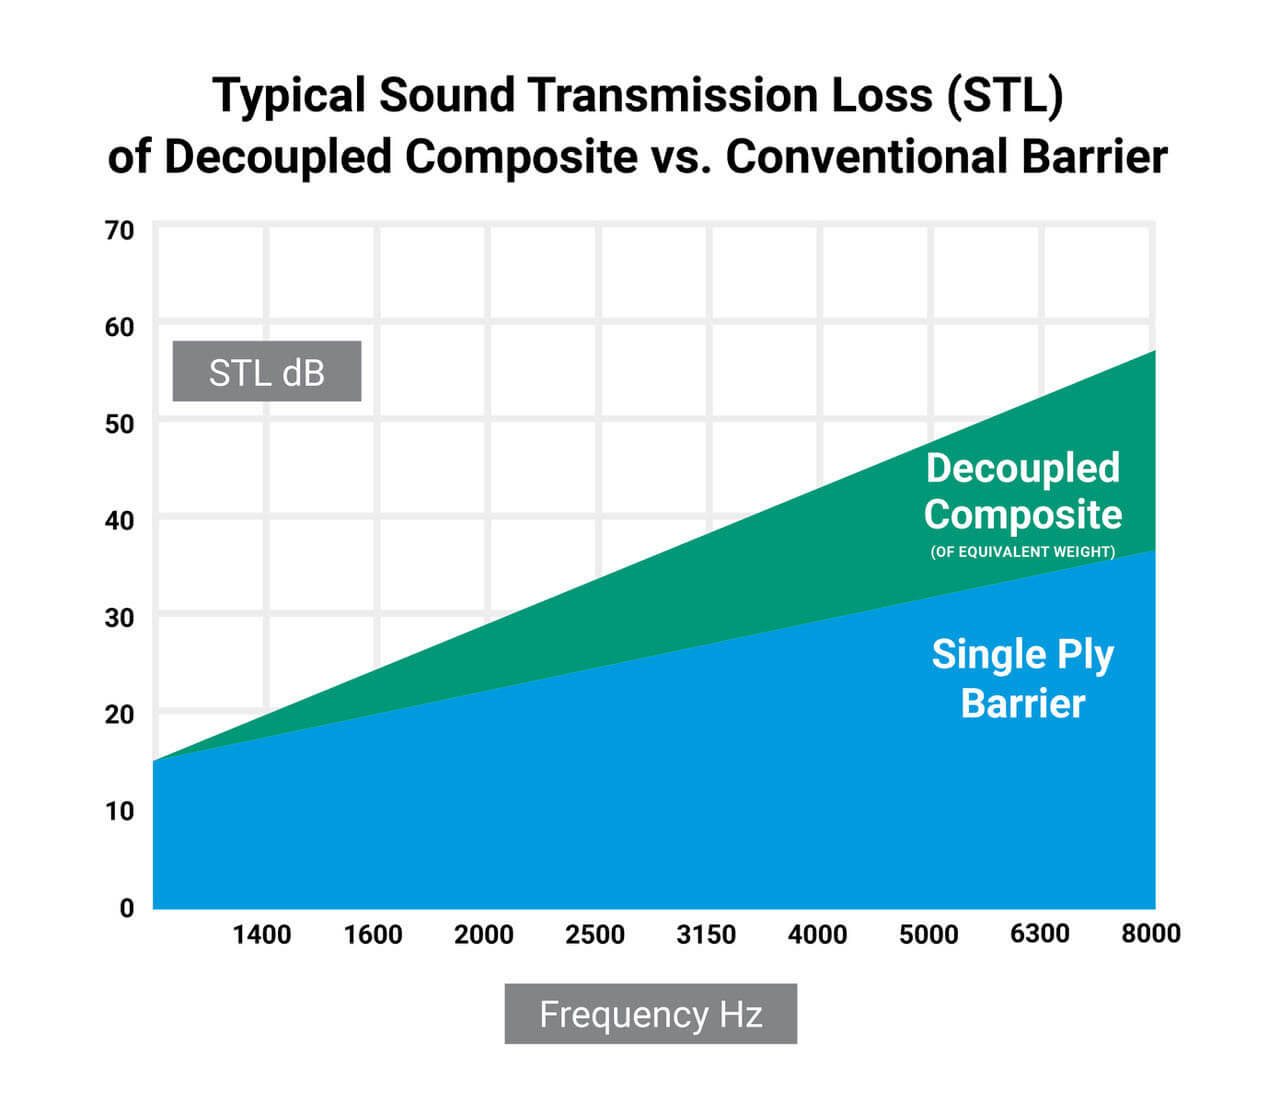 Chart showing the typical sound transmission loss of decoupled composite vs. conventional barrier